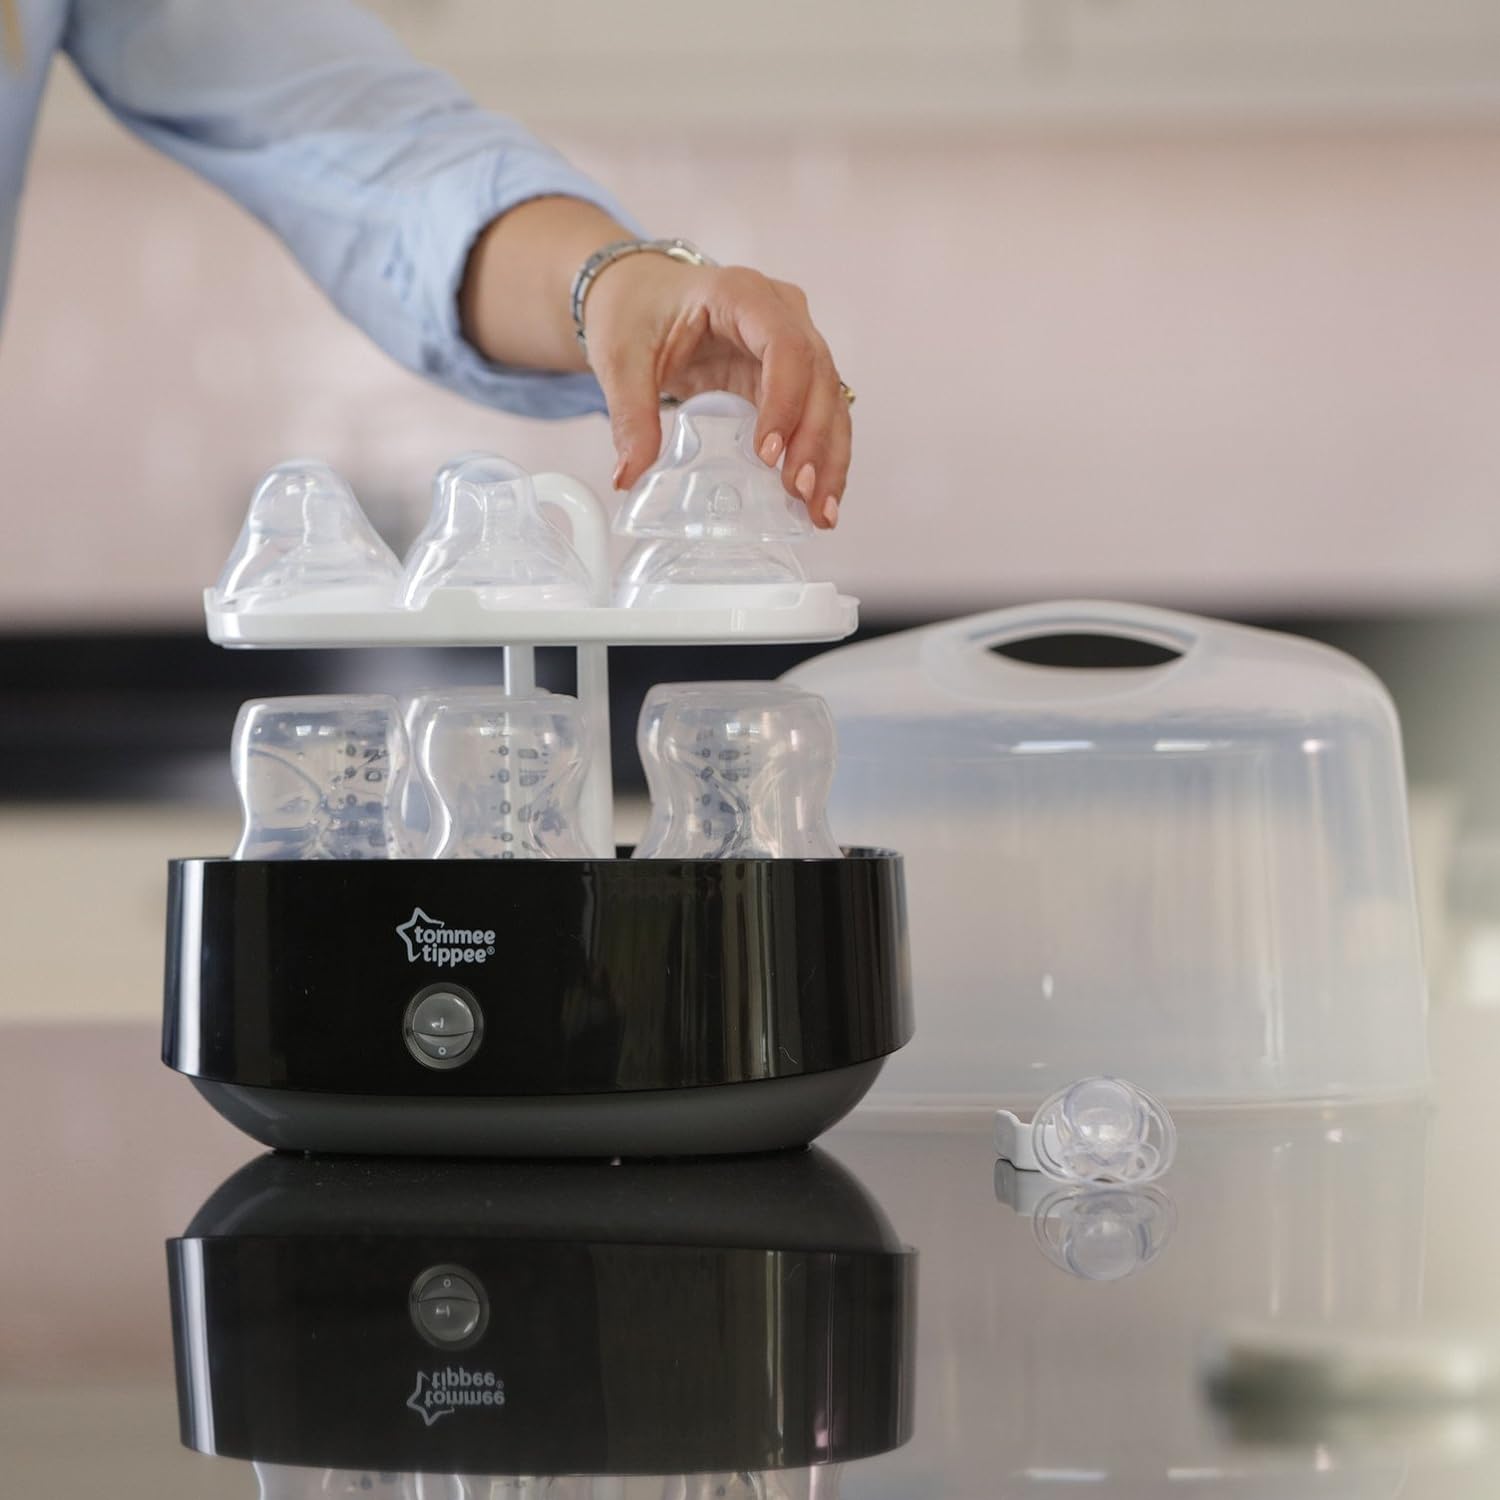 Bottle Sterilizer Review: The Best Options for Clean and Safe Baby Bottles